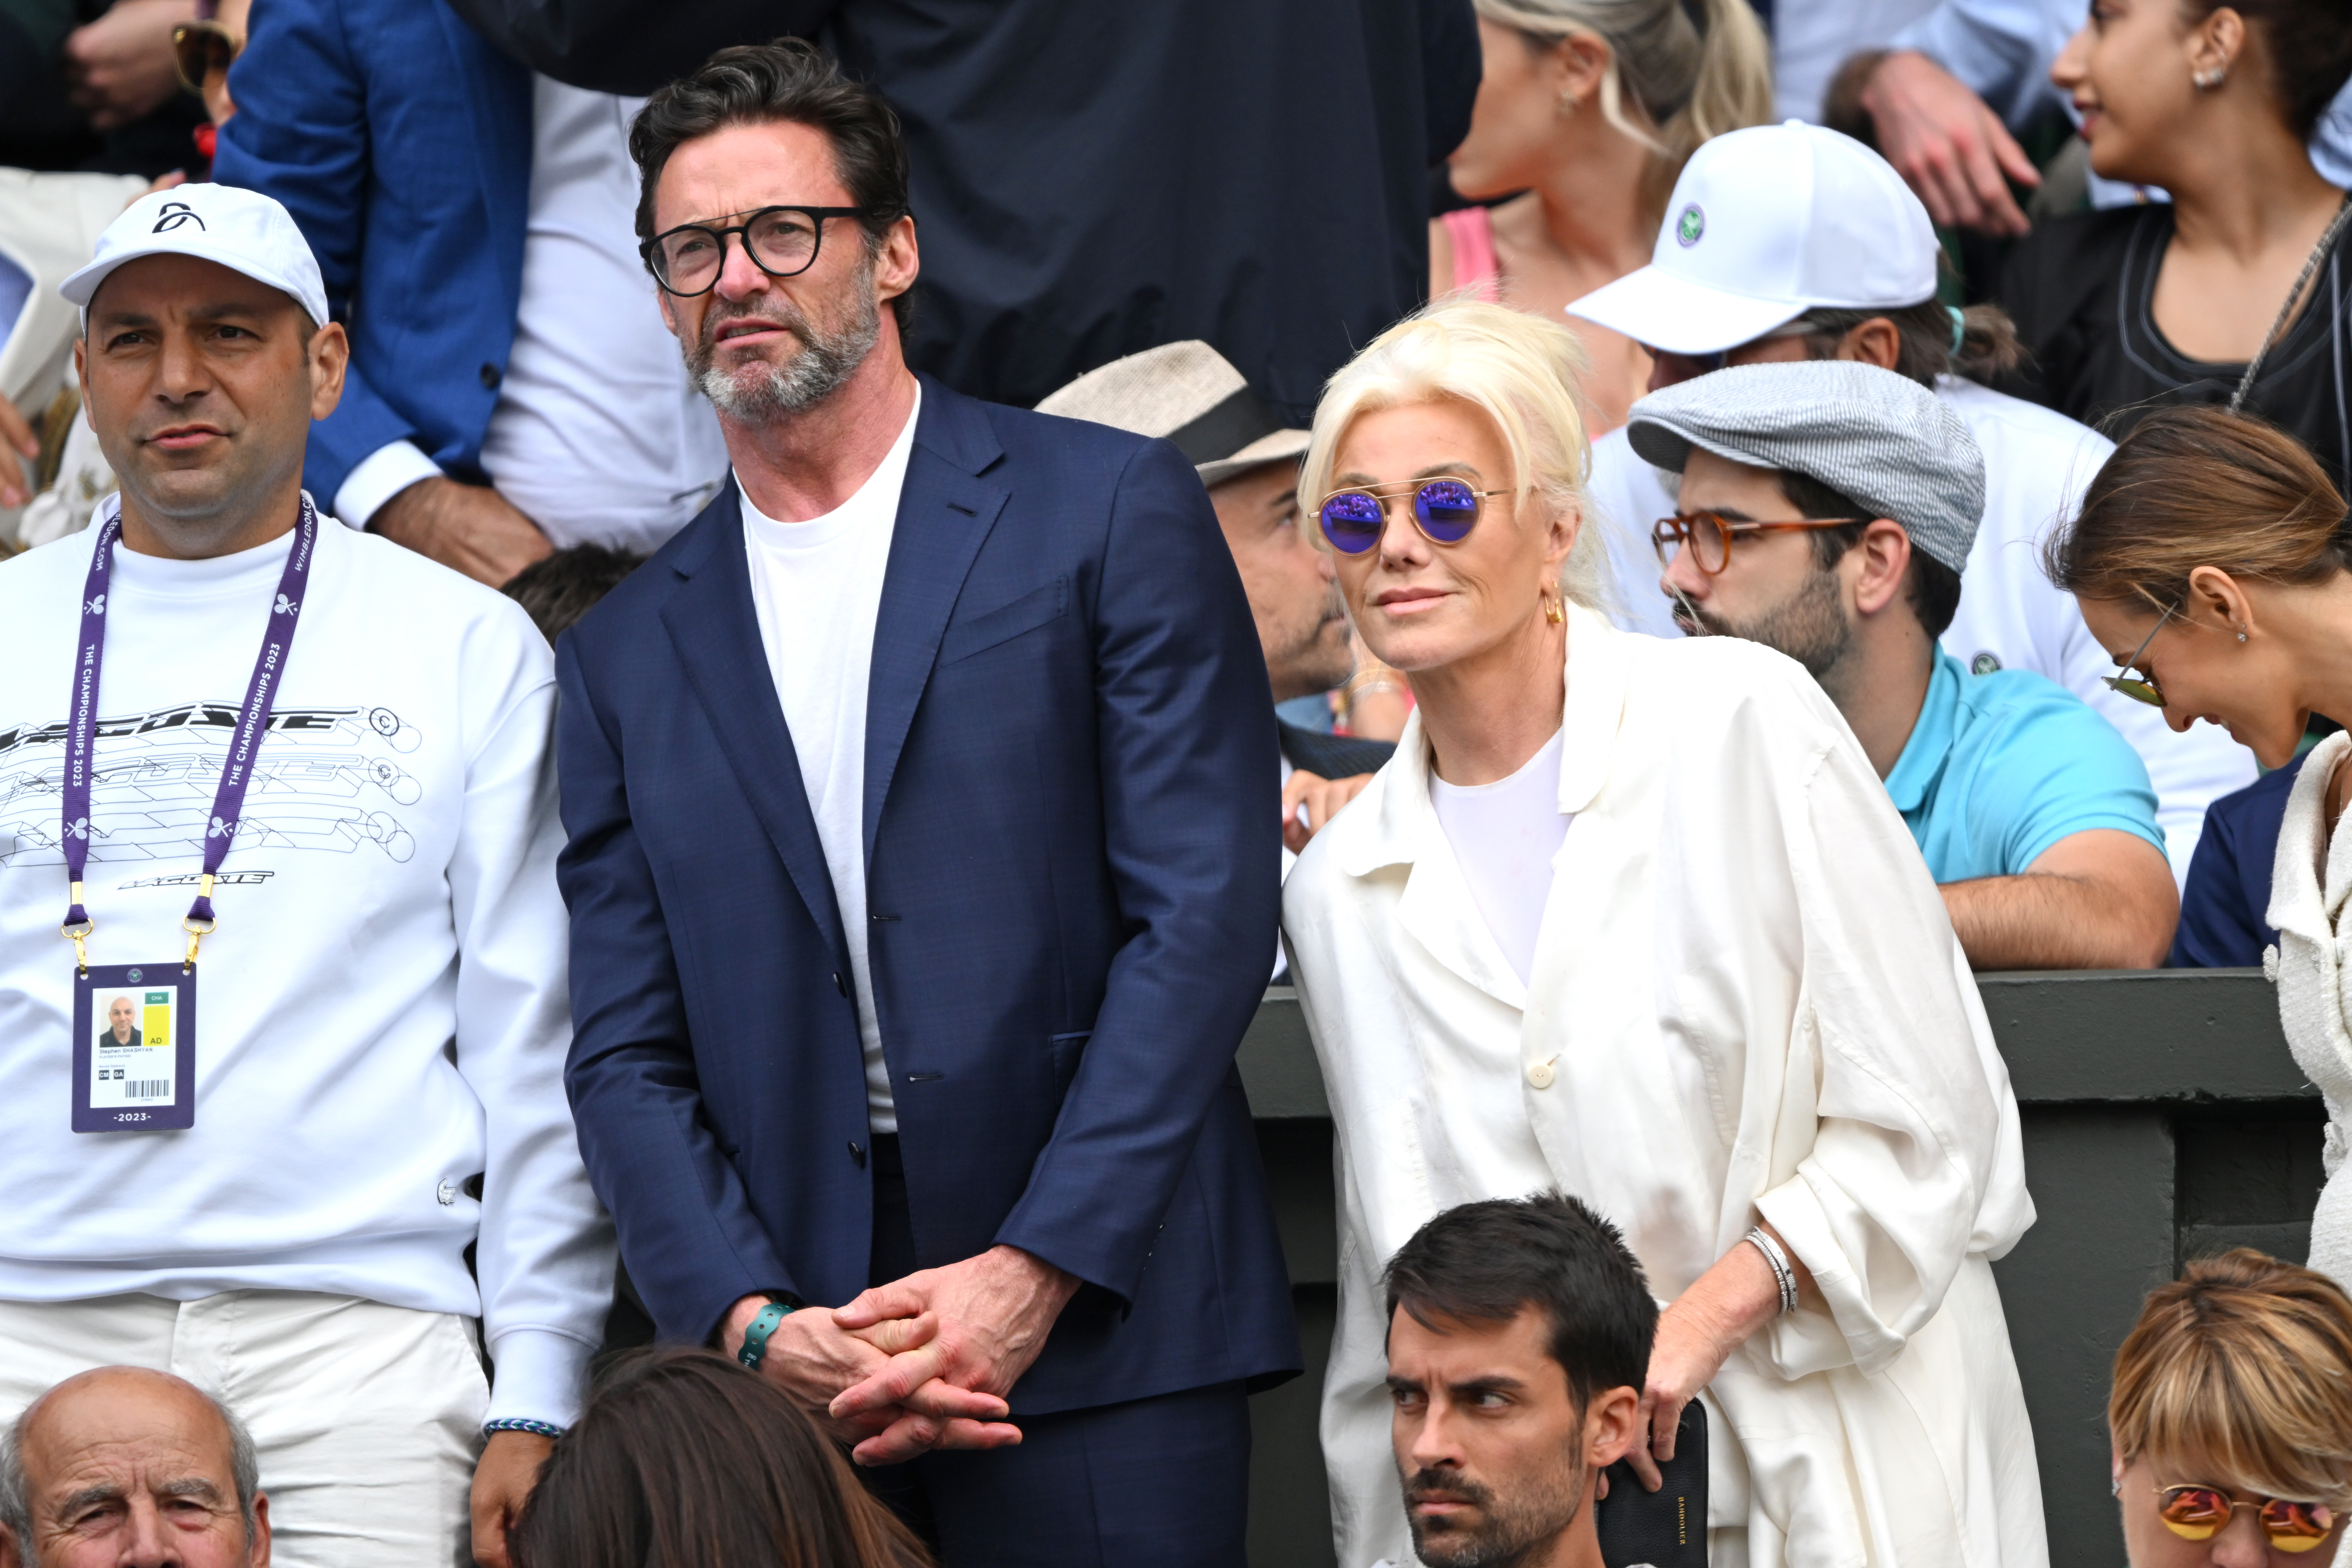 Hugh Jackman and Deborra-Lee Furness in London, England on July 16, 2023 | Source: Getty Images